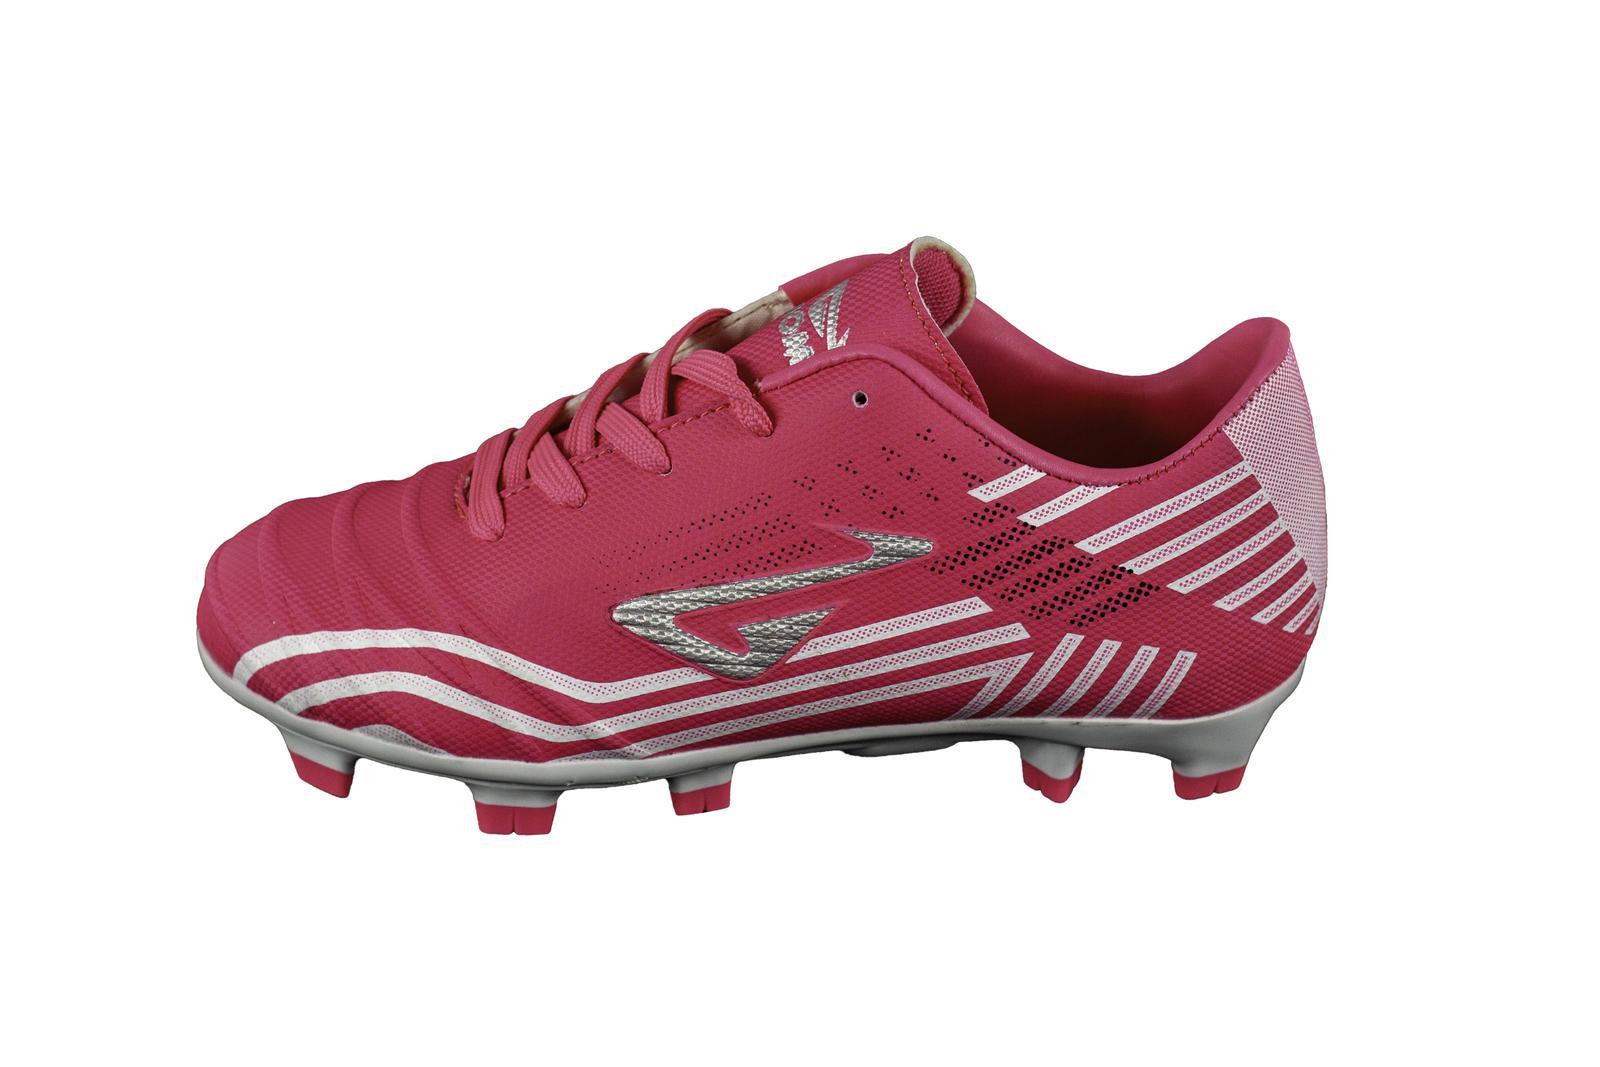 Nomis Prodigy Junior FG Boots - Pink / White / Silver - US Kid's Size 11C